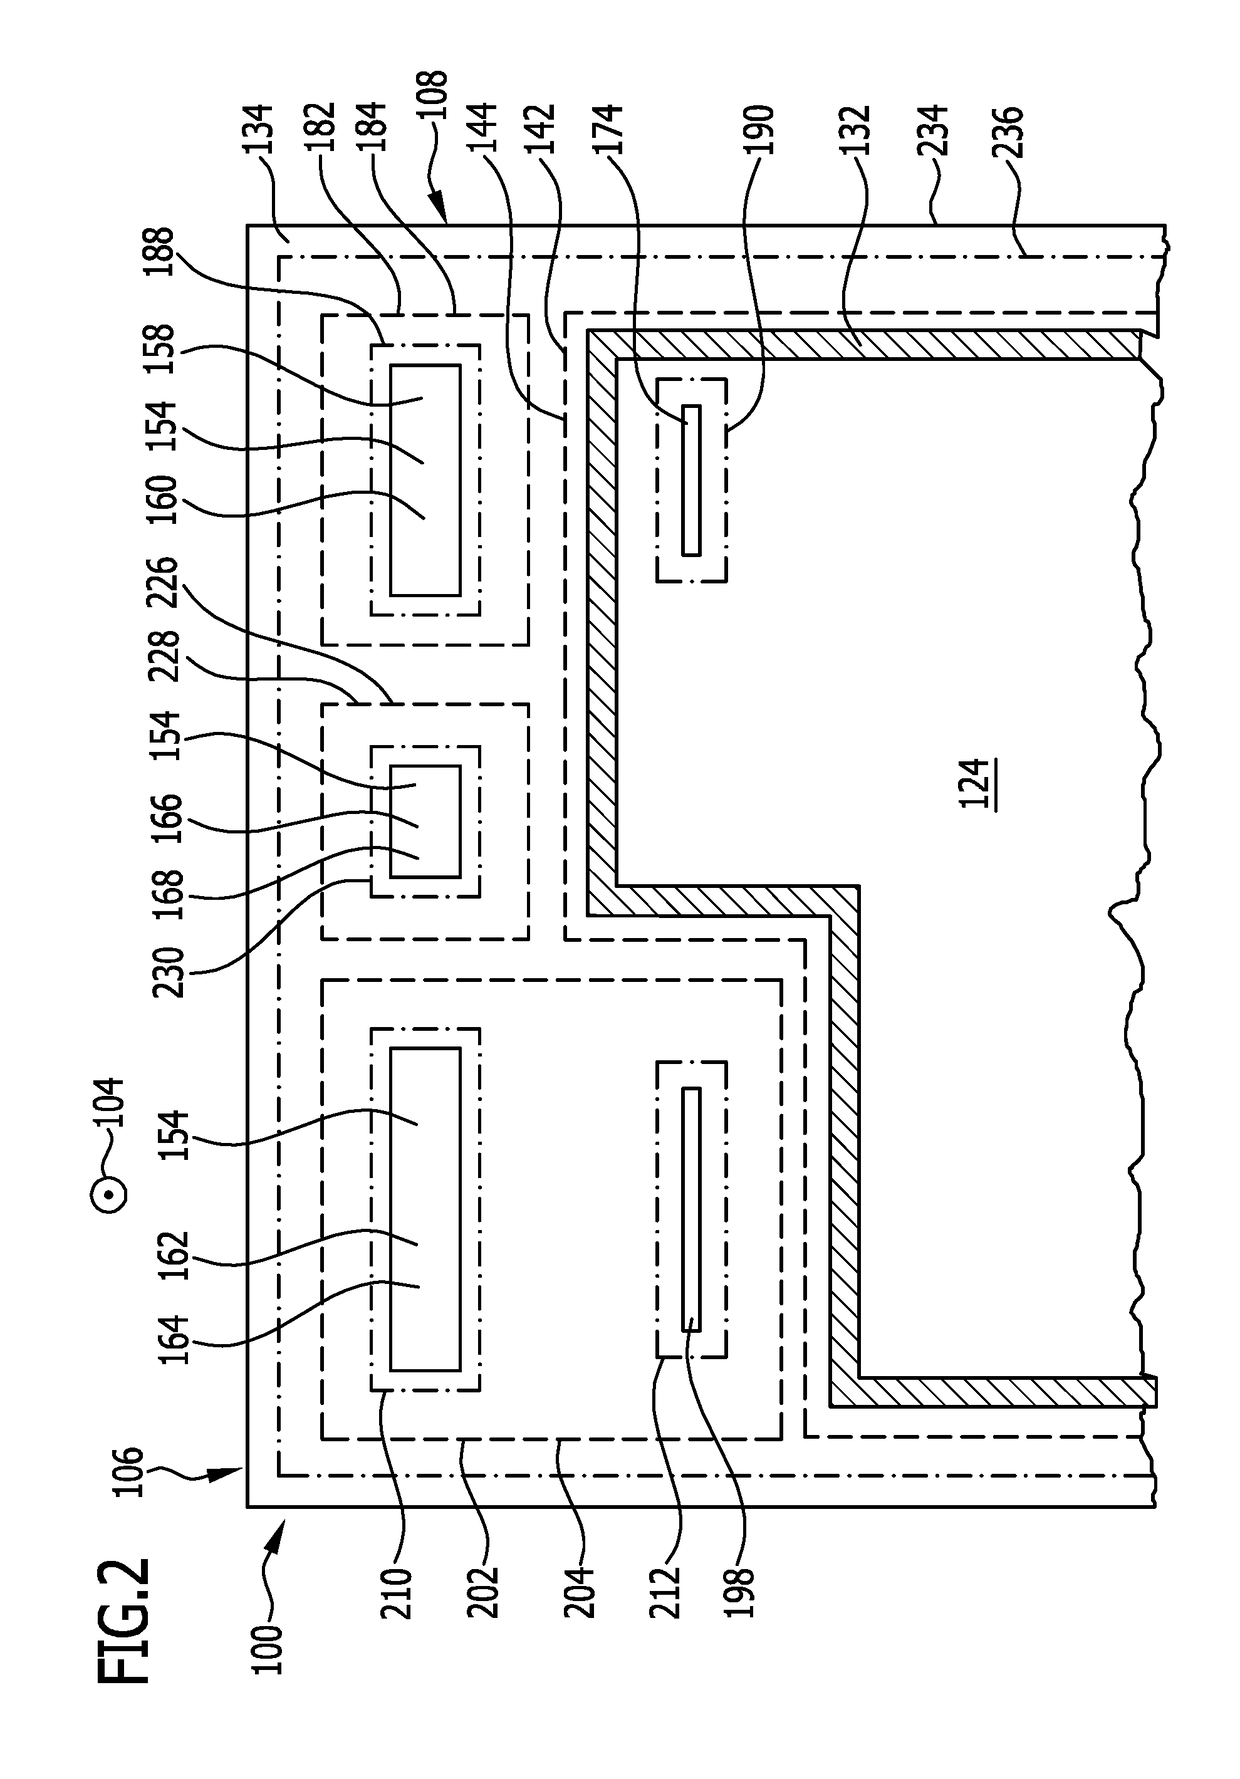 Electrochemical device and method for producing an electrochemical unit for an electrochemical device